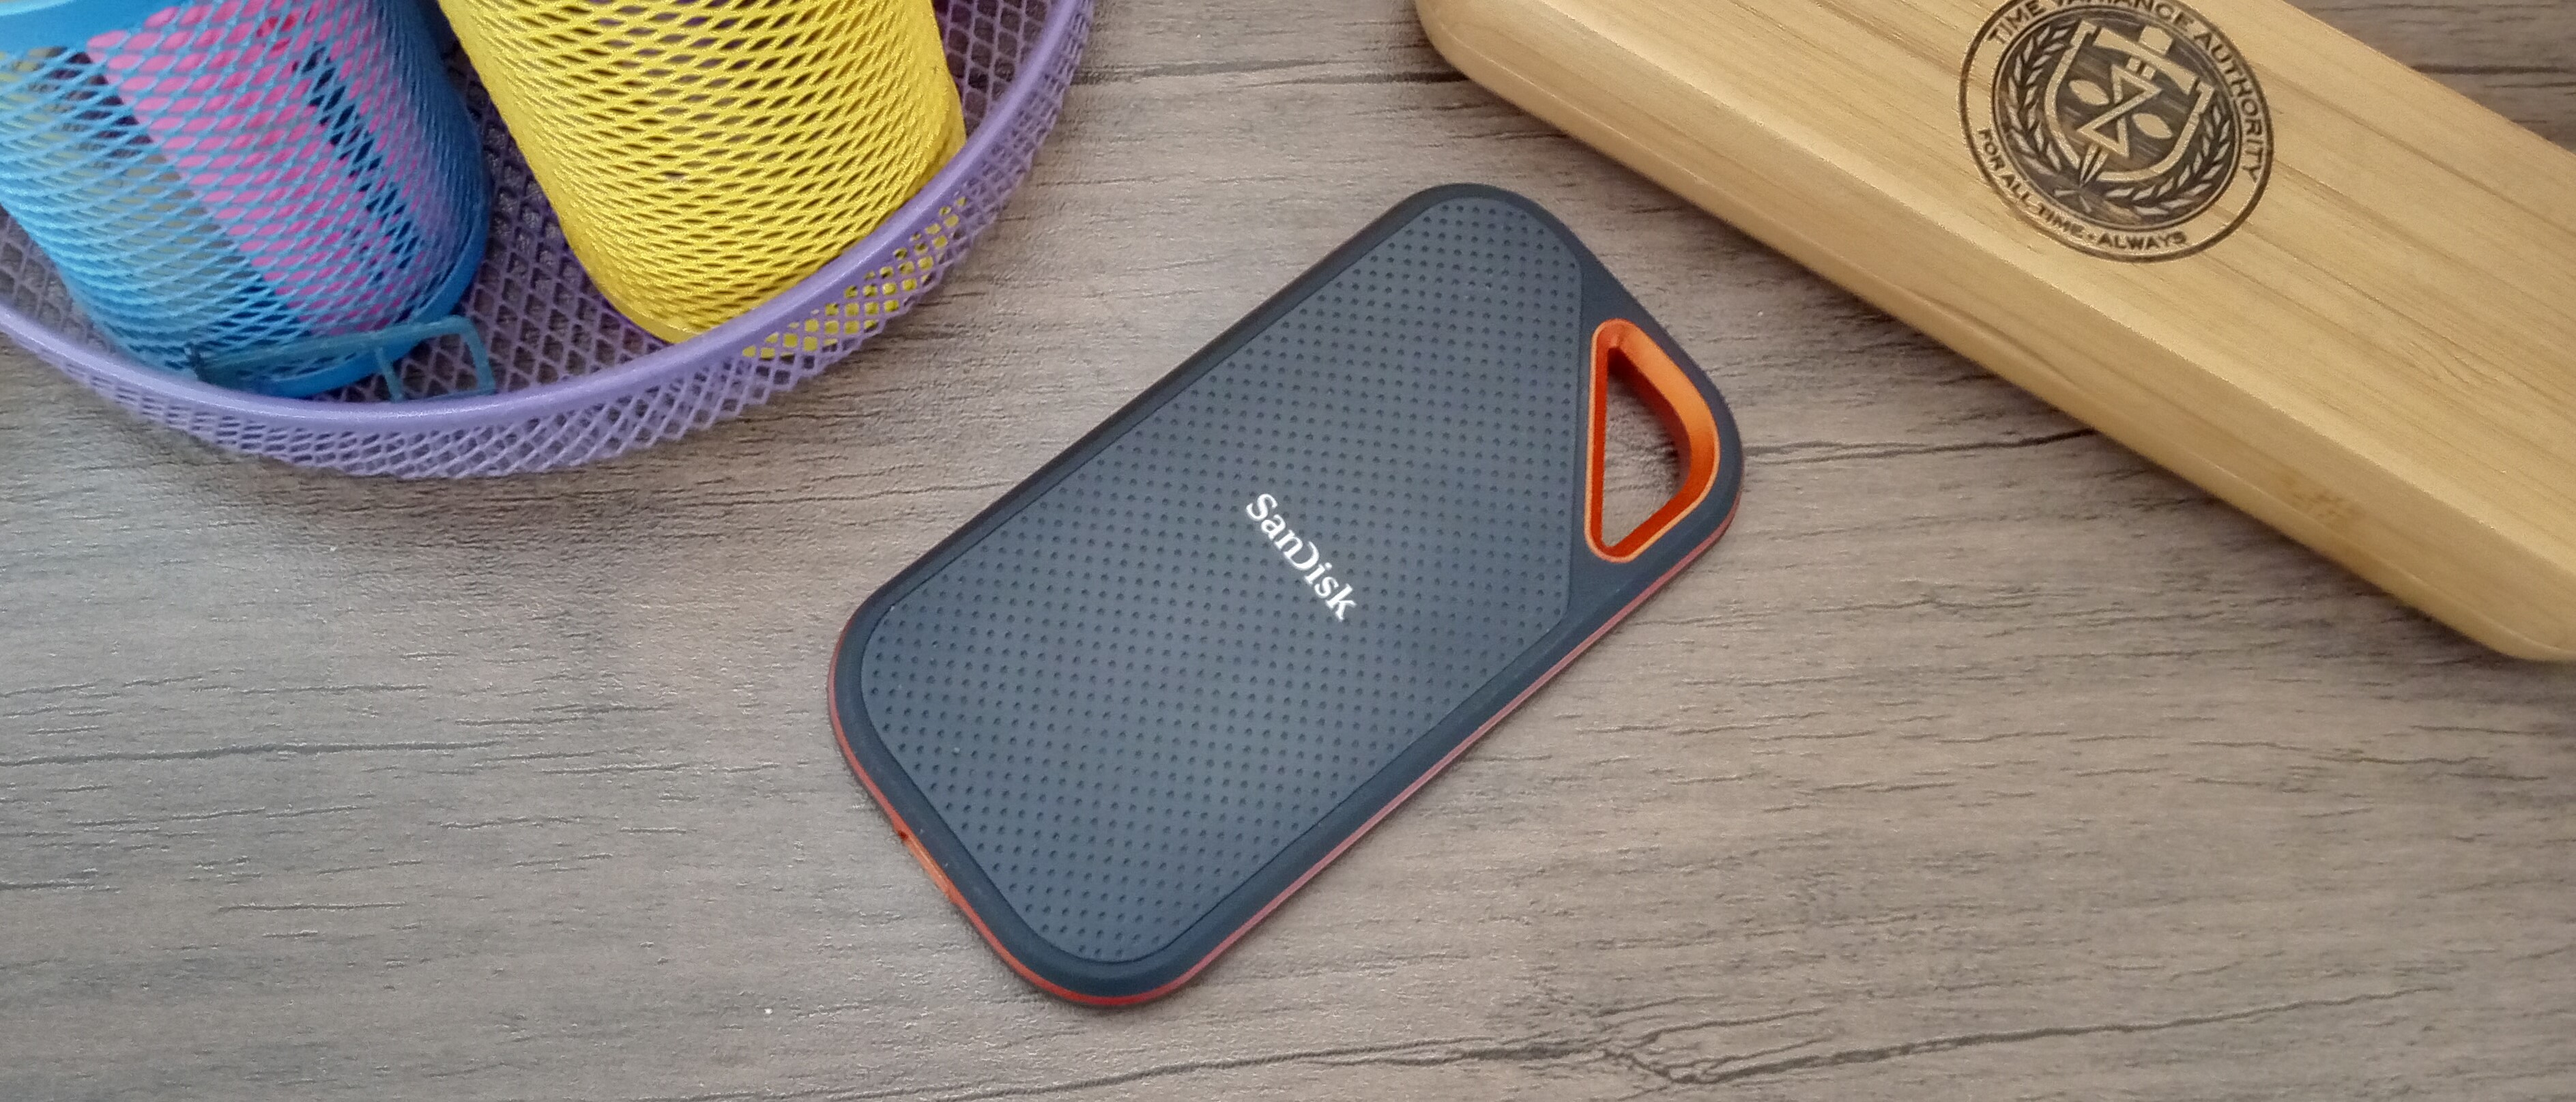 Sandisk Extreme Pro SSD Review - The Best Portable SSD?